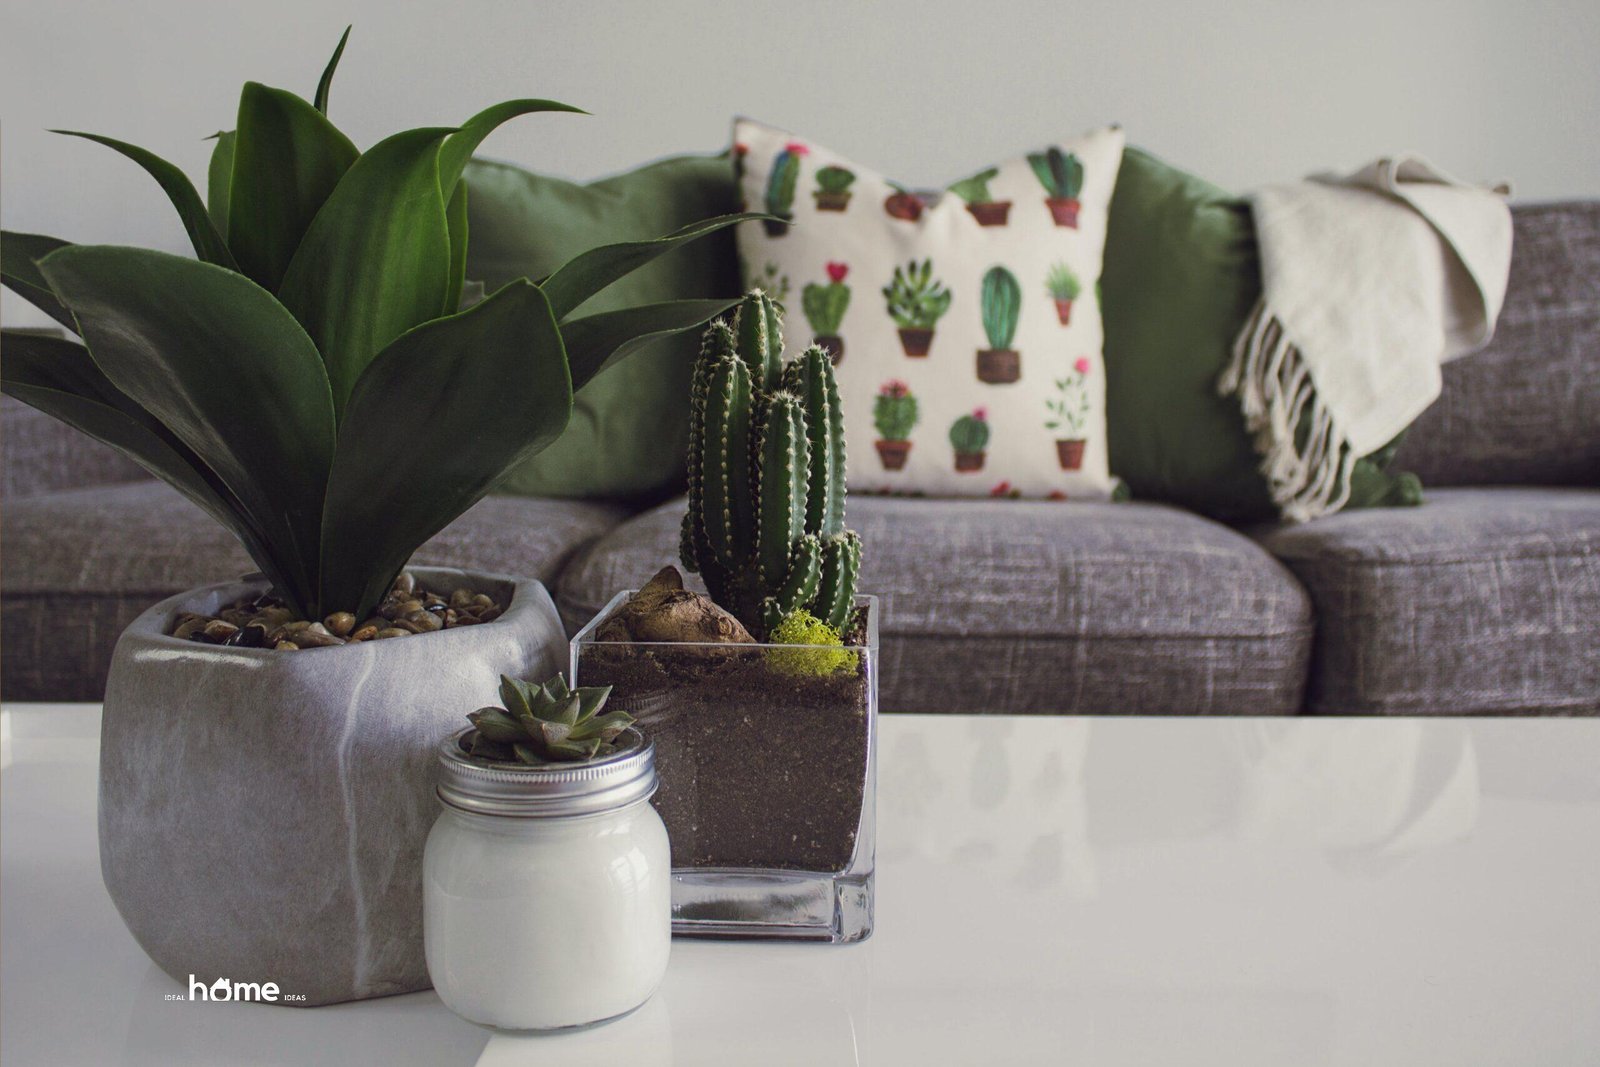 Incorporating Natural Elements Into Your Home Decor